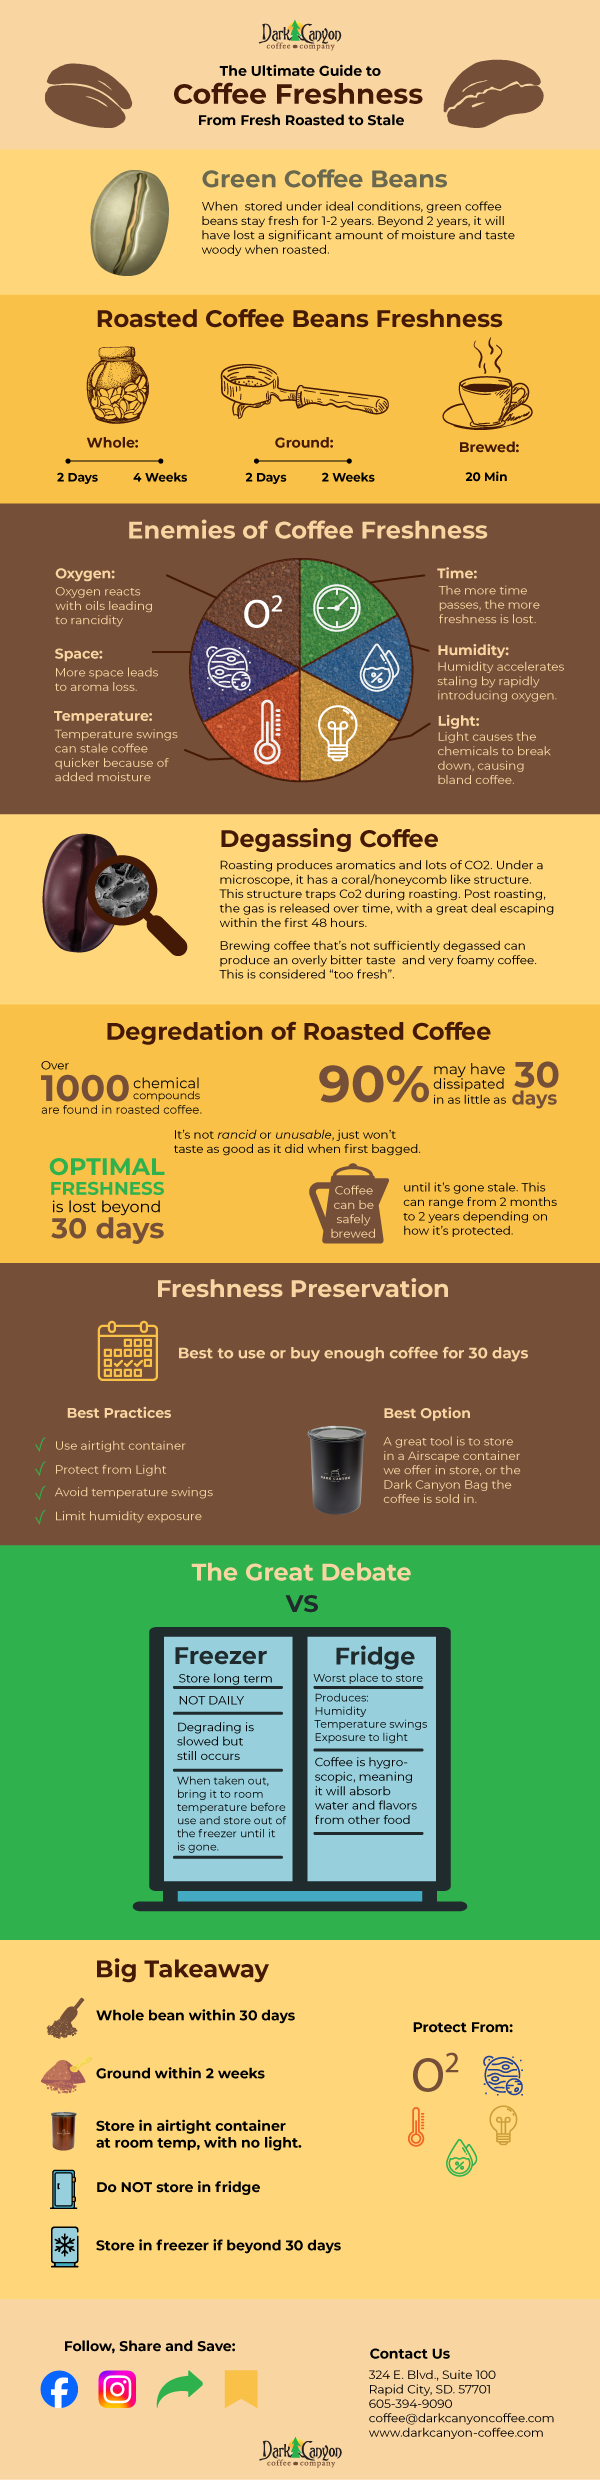 coffee freshness guide infographic dark canyon coffee